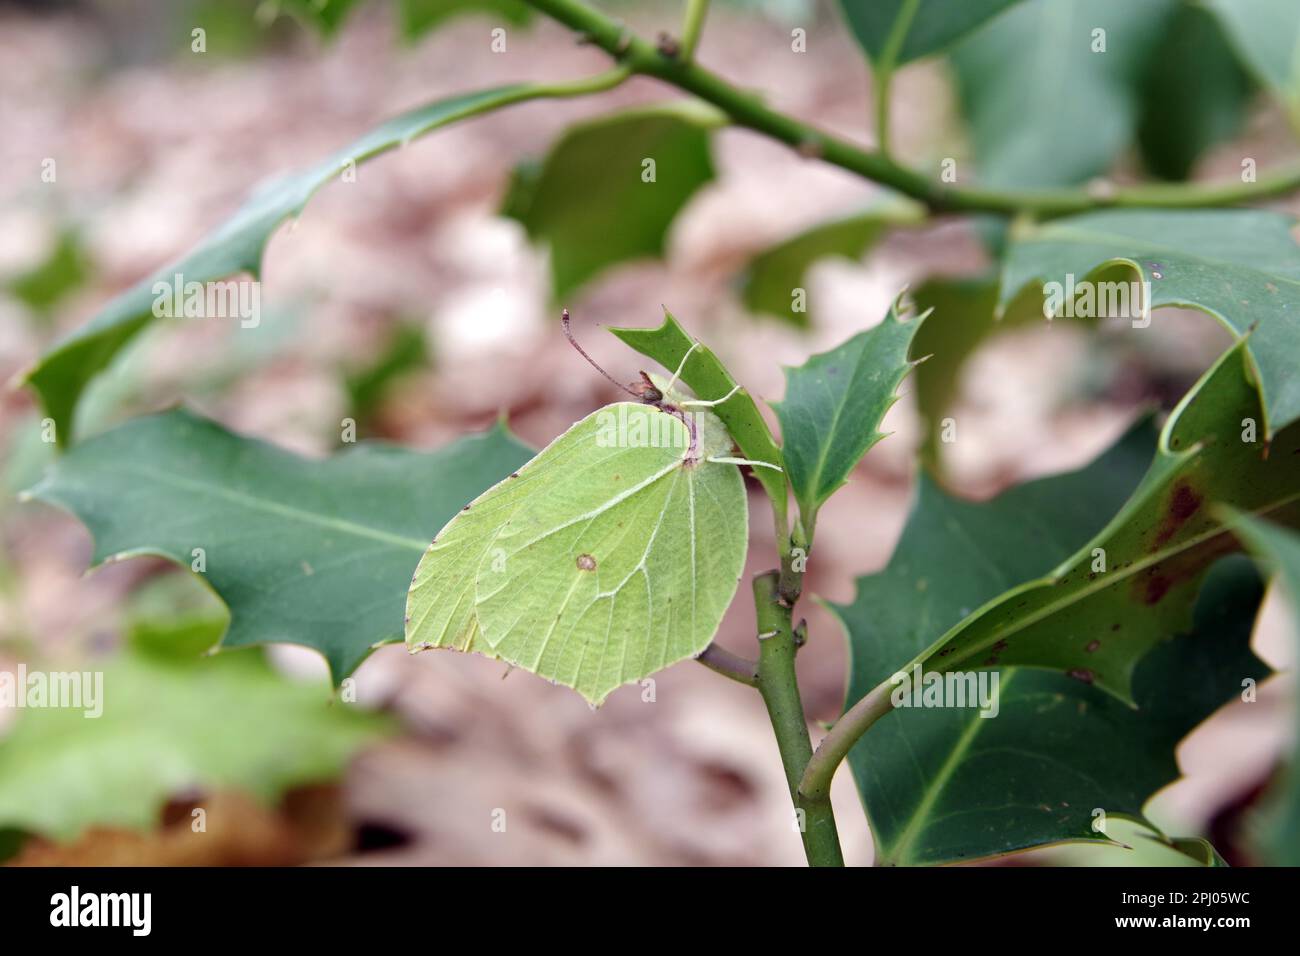 Brimstone (Gonepteryx rhamni), female, butterfly, leaves, outside, spring, Germany, A female lemon butterfly sits with closed wings on a green leaf Stock Photo